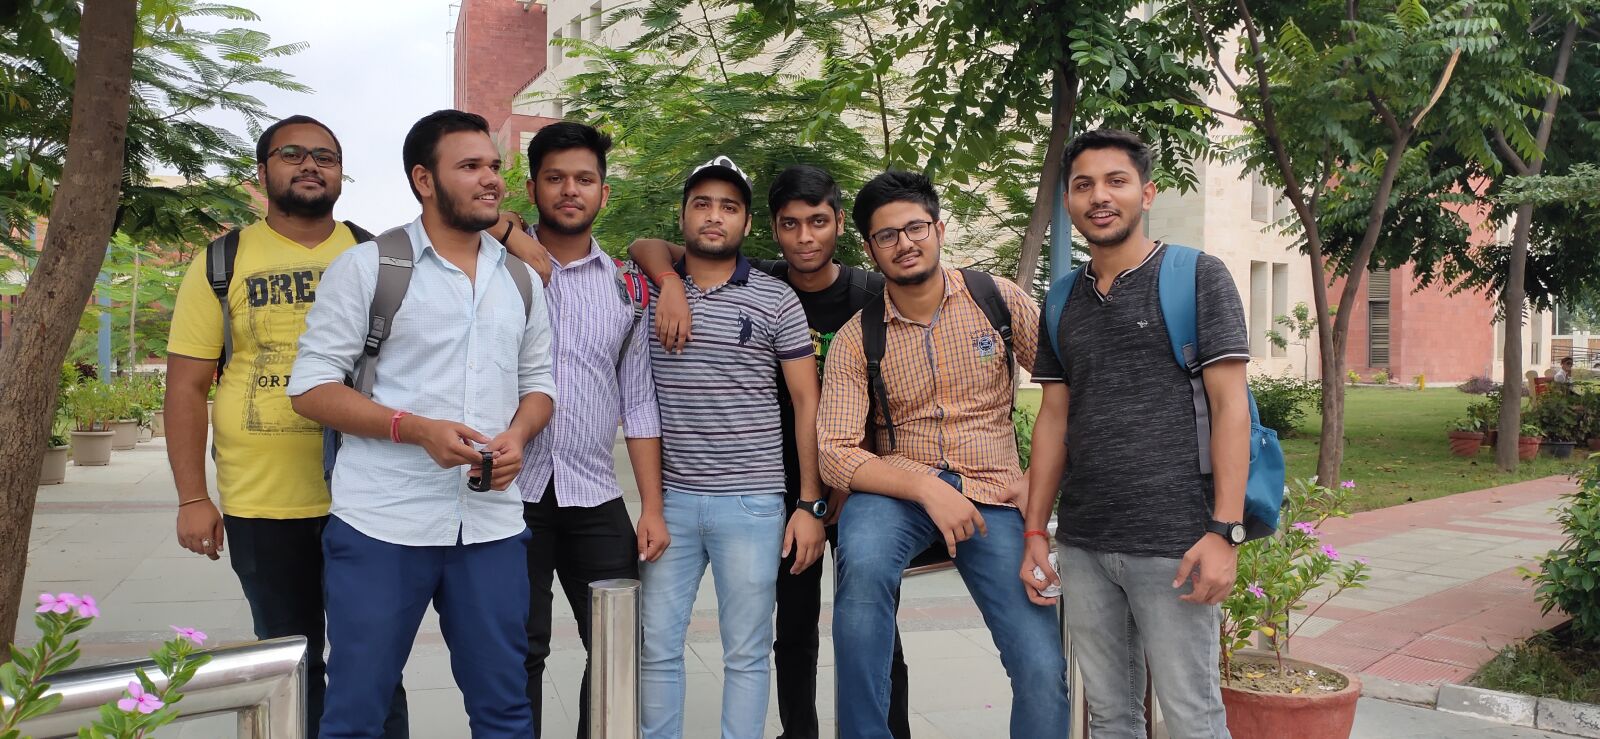 vivo 1951 sample photo. College, friends, engineers photography